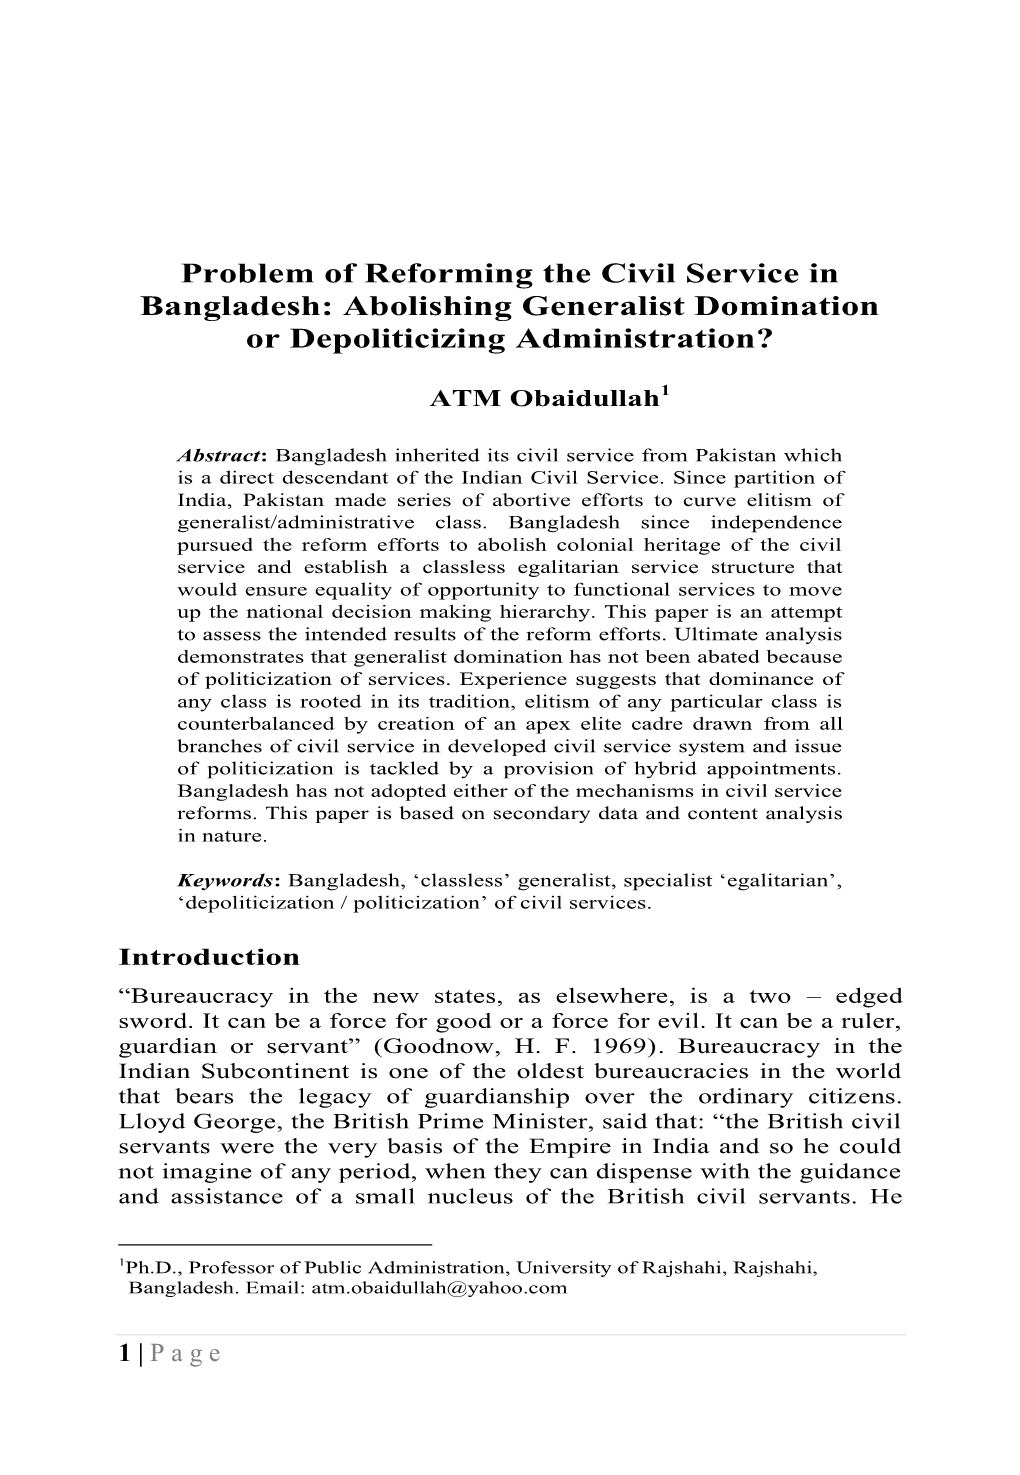 Problem of Reforming the Civil Service in Bangladesh: Abolishing Generalist Domination Or Depoliticizing Administration?